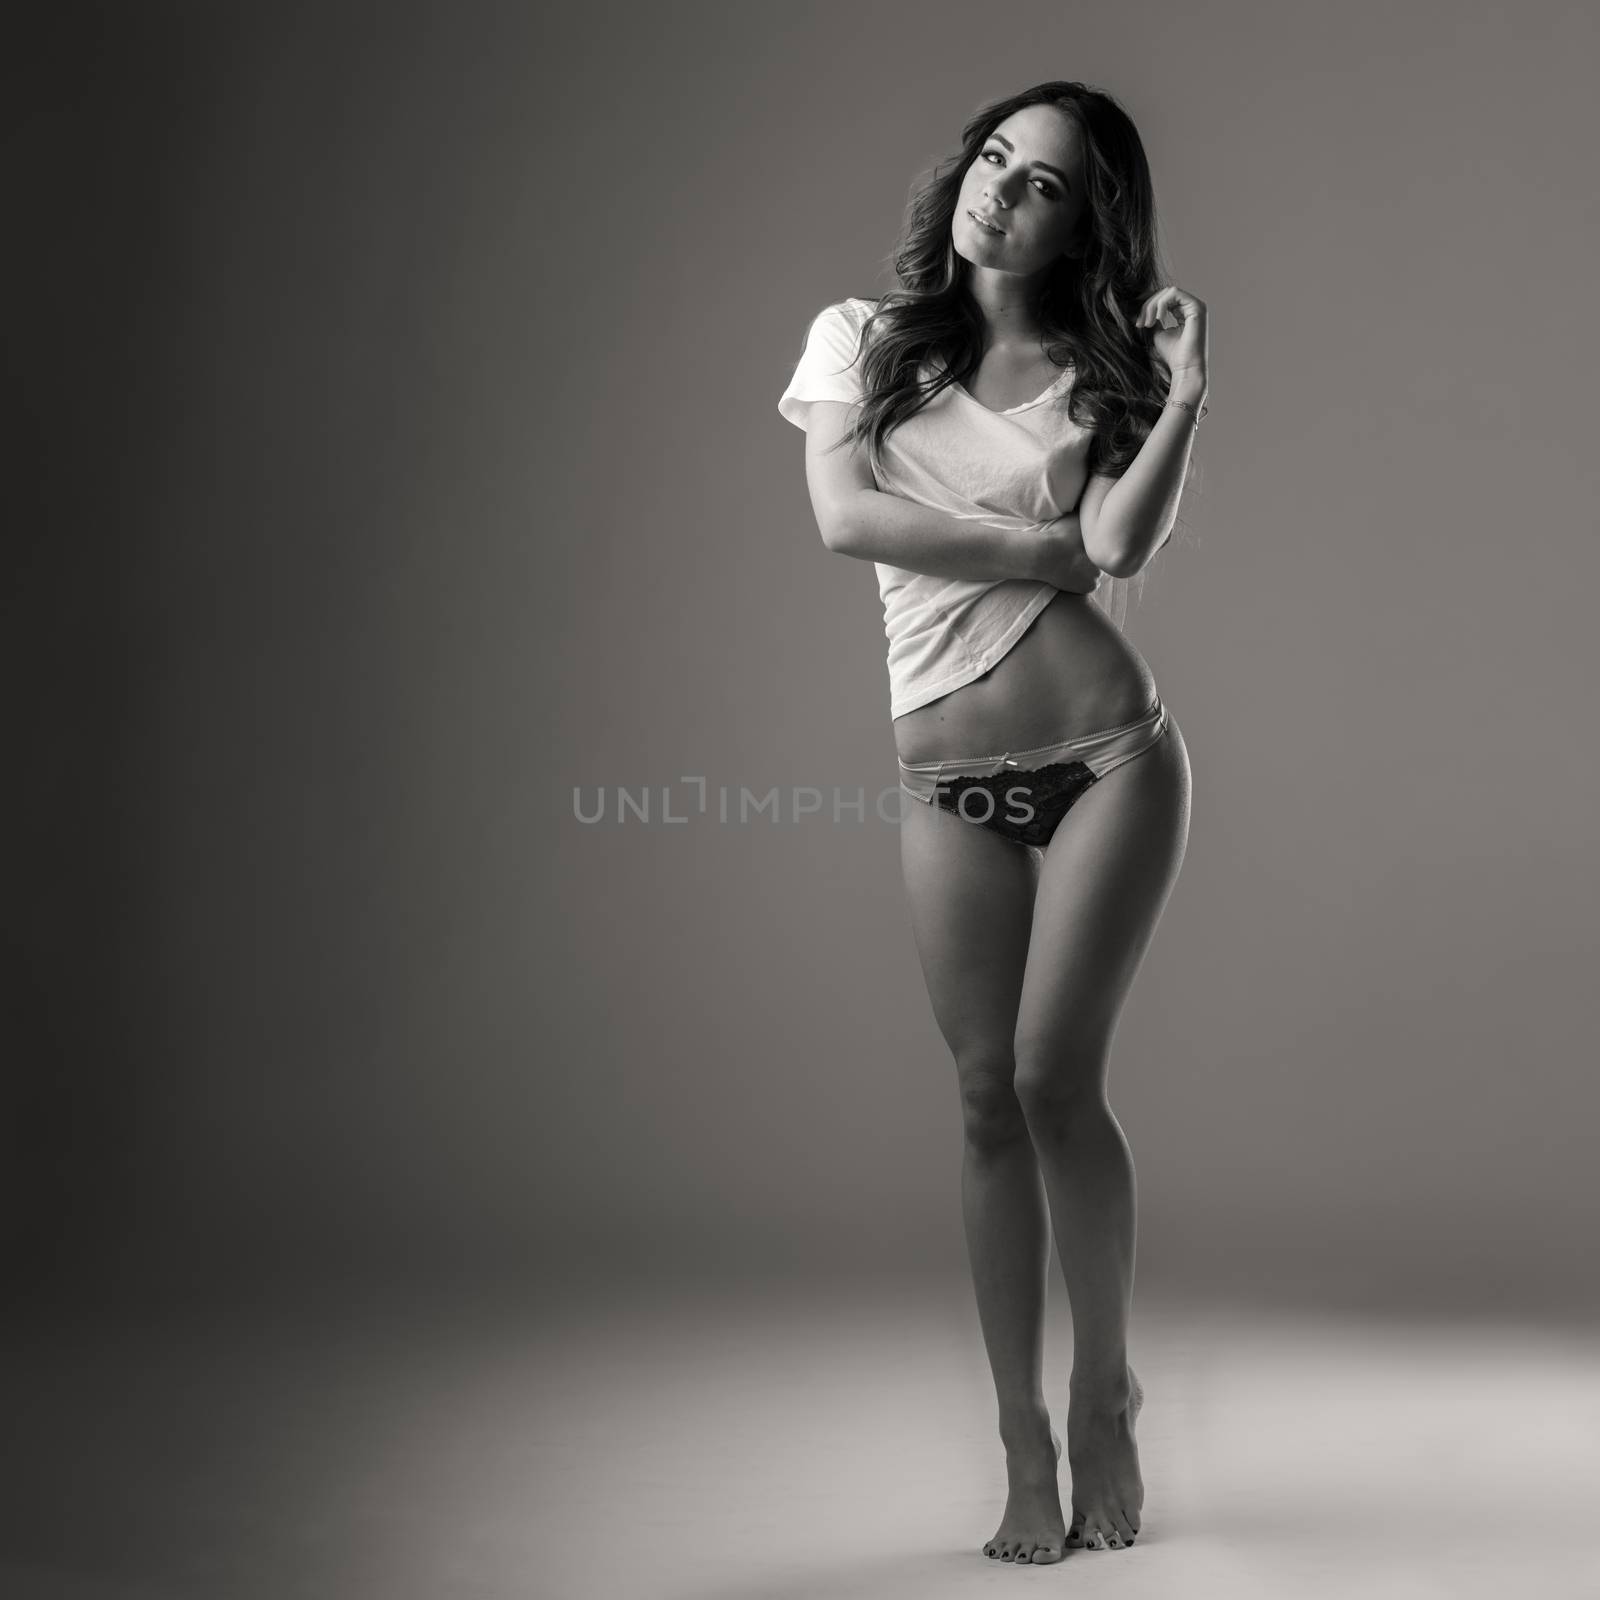 Beautiful young woman in underwear and tshirt by CelsoDiniz